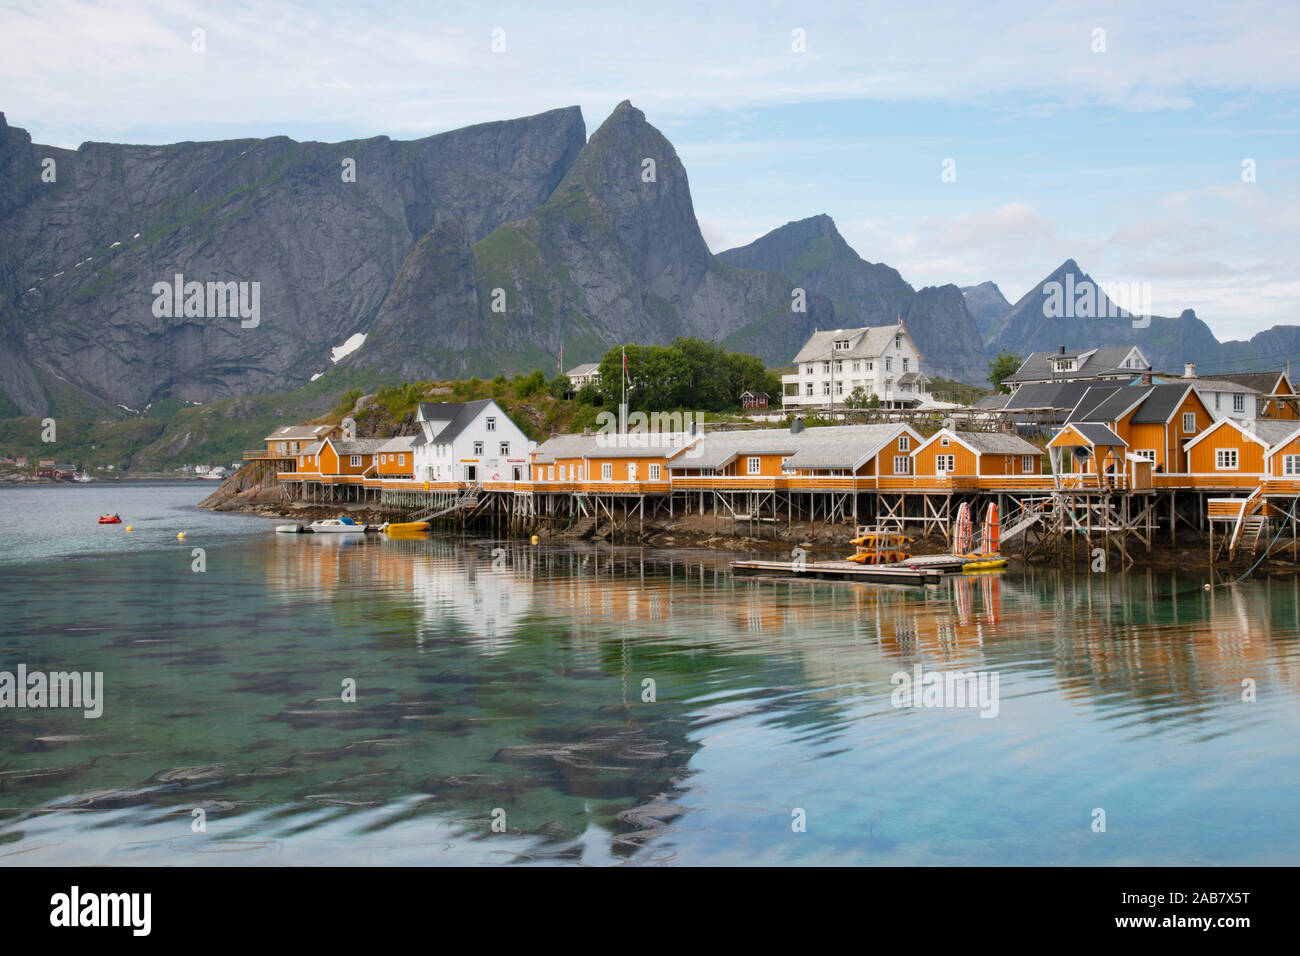 Rorbu, traditional fishing huts used for tourist accommodation in village of Reine, Moskensoya, Lofoten Islands, Norway, Europe Stock Photo